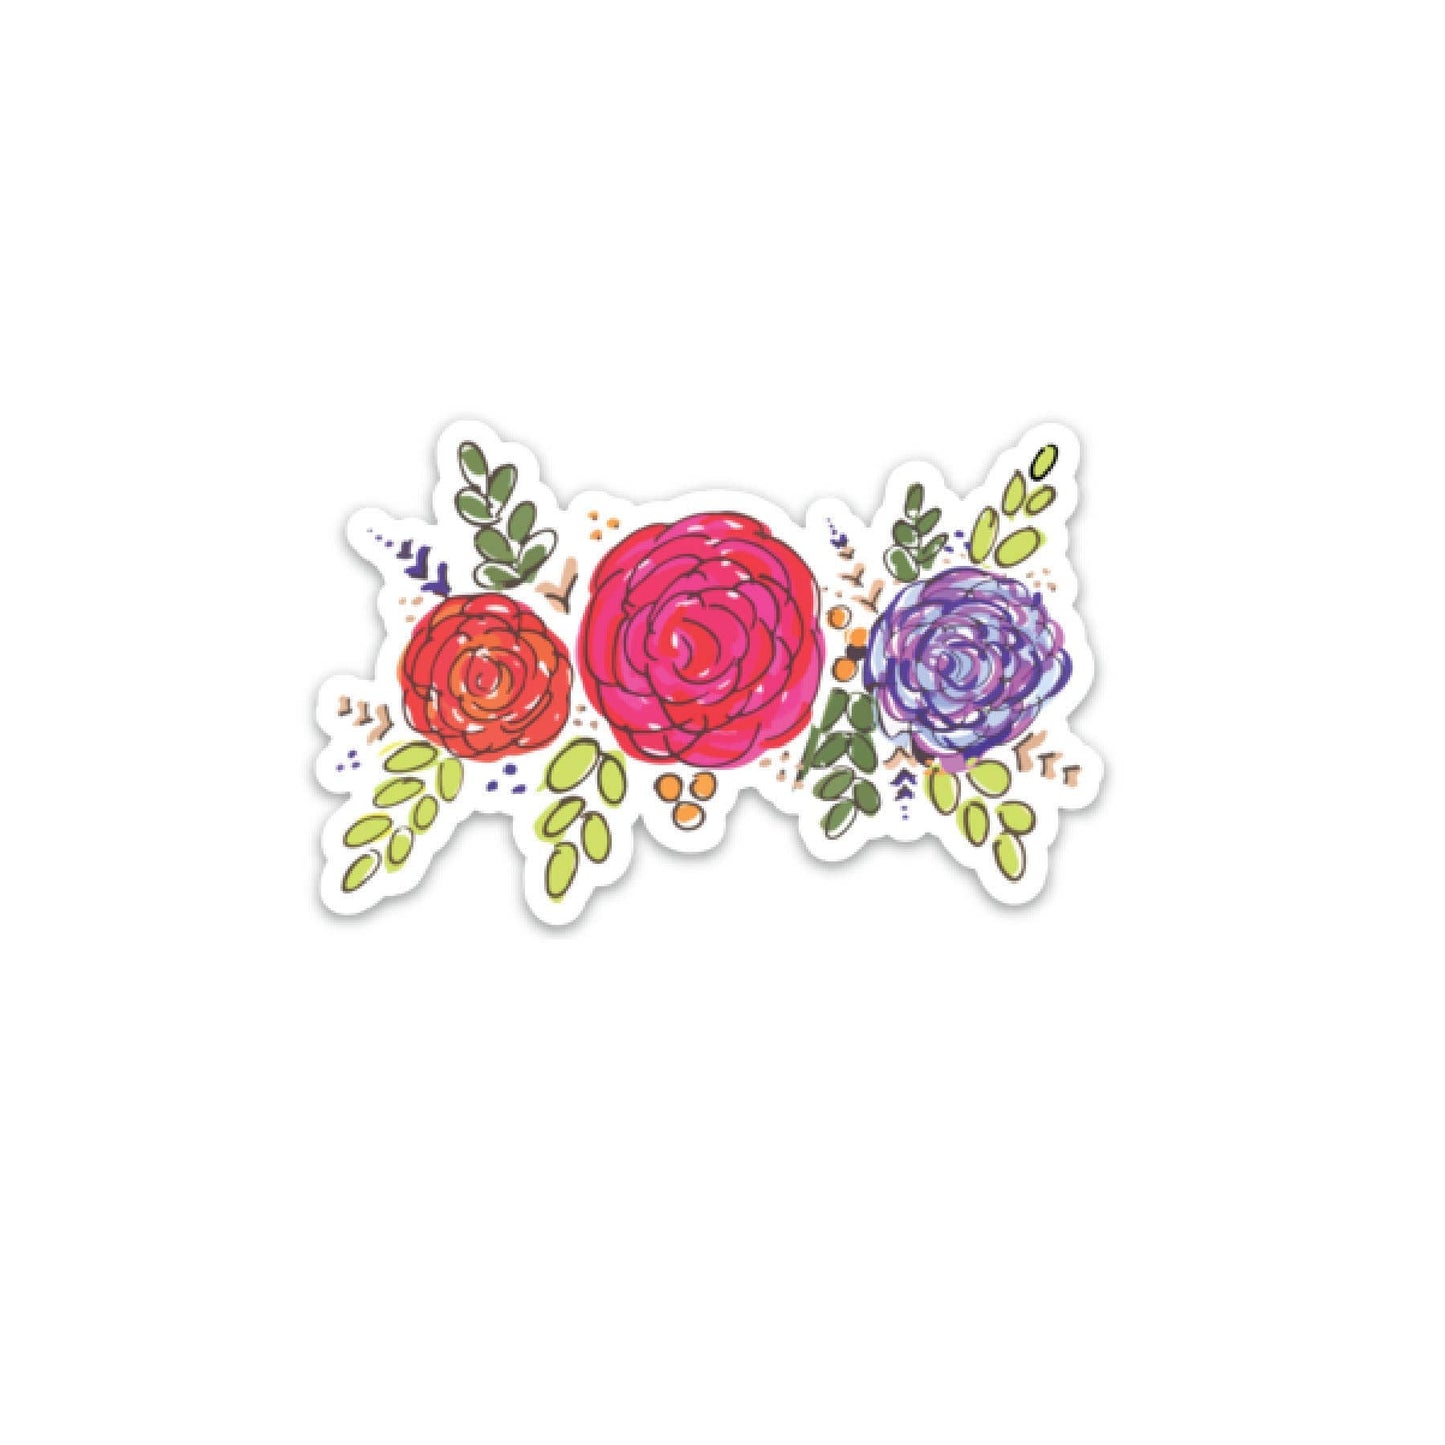 Floral Garland Decal Home & Lifestyle Default